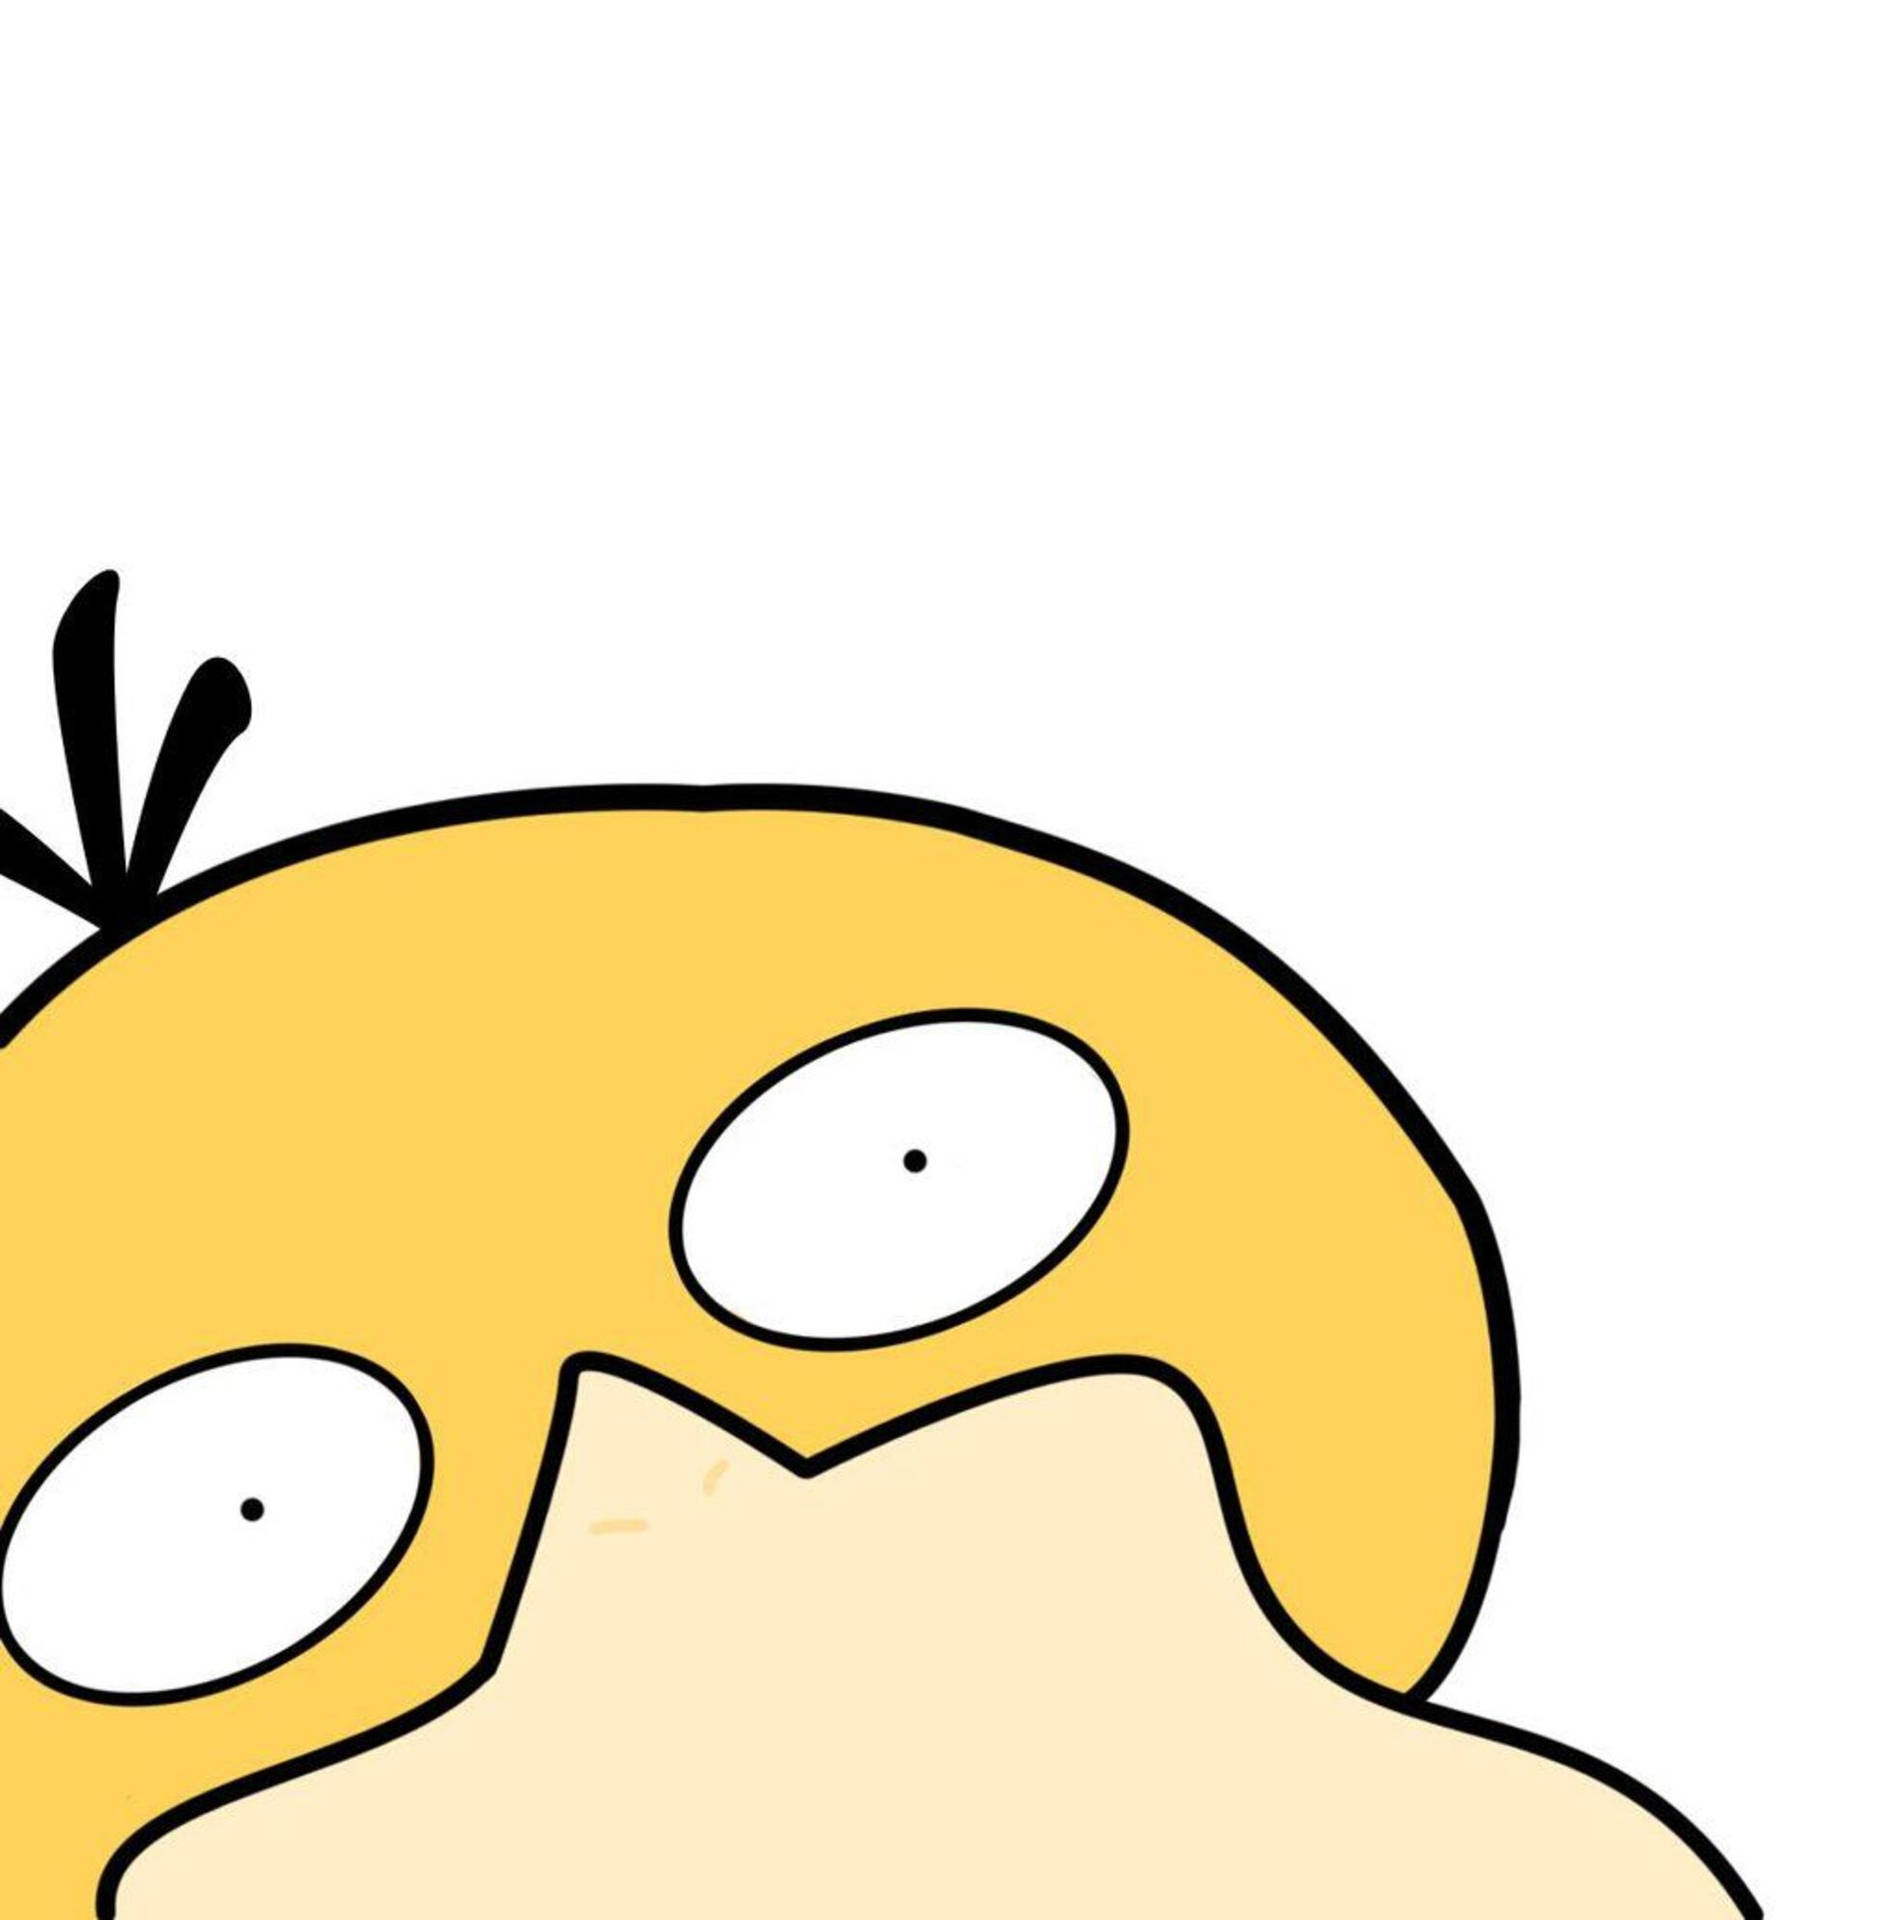 You'll be surprised by what this peeking Psyduck can do. Wallpaper